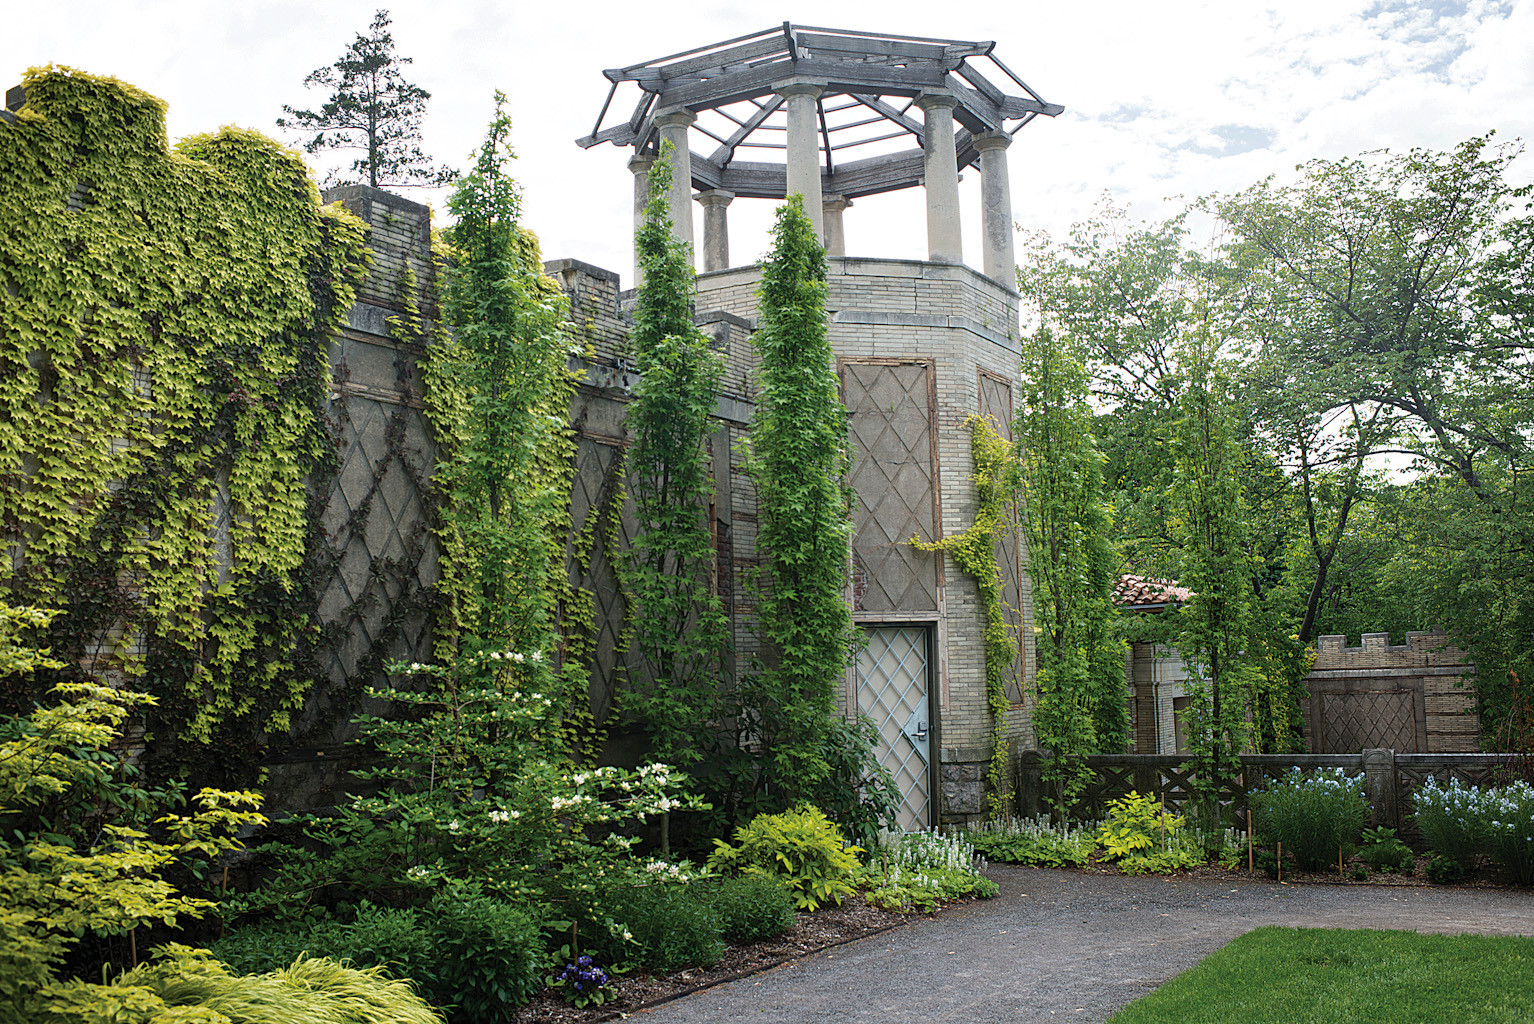 Part of the Walled Garden at Untermyer Gardens, modeled on Greco-Roman designs.